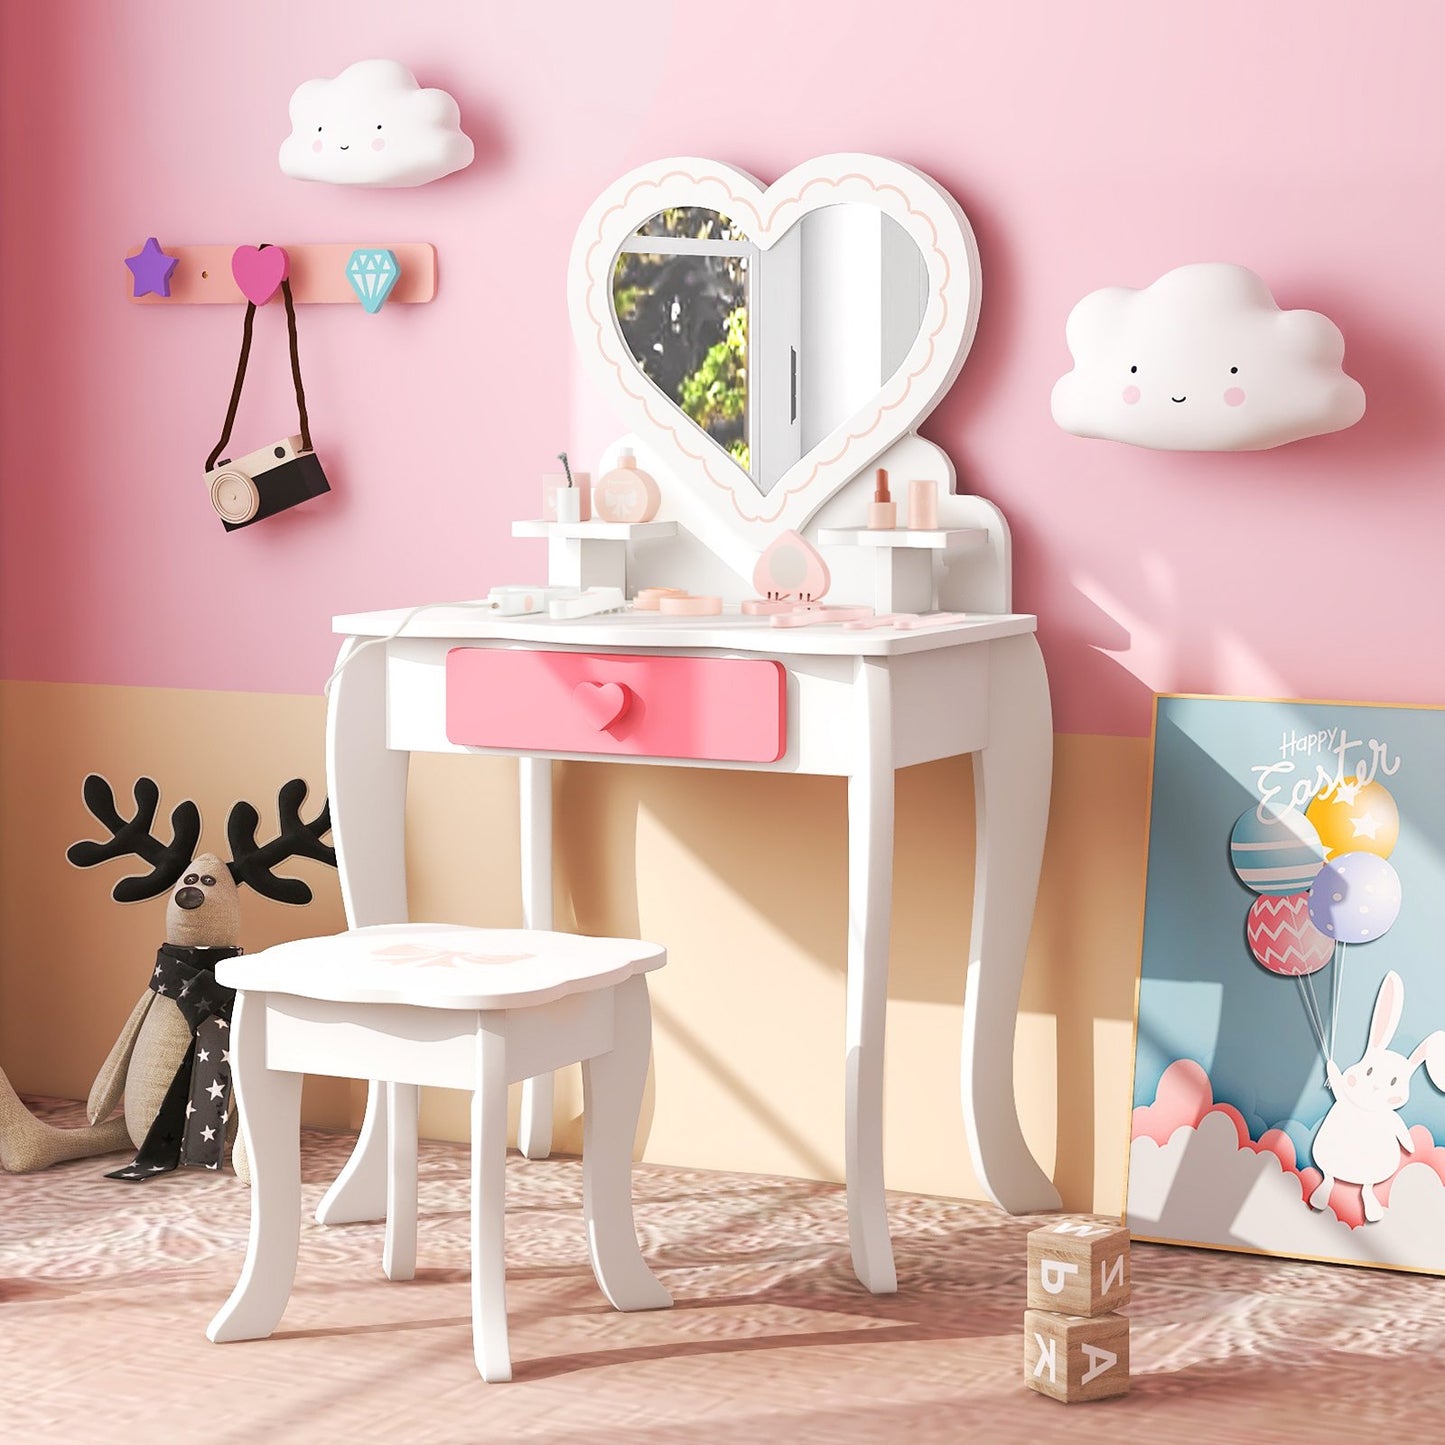 Kids Vanity Set with Heart-shaped Mirror, White